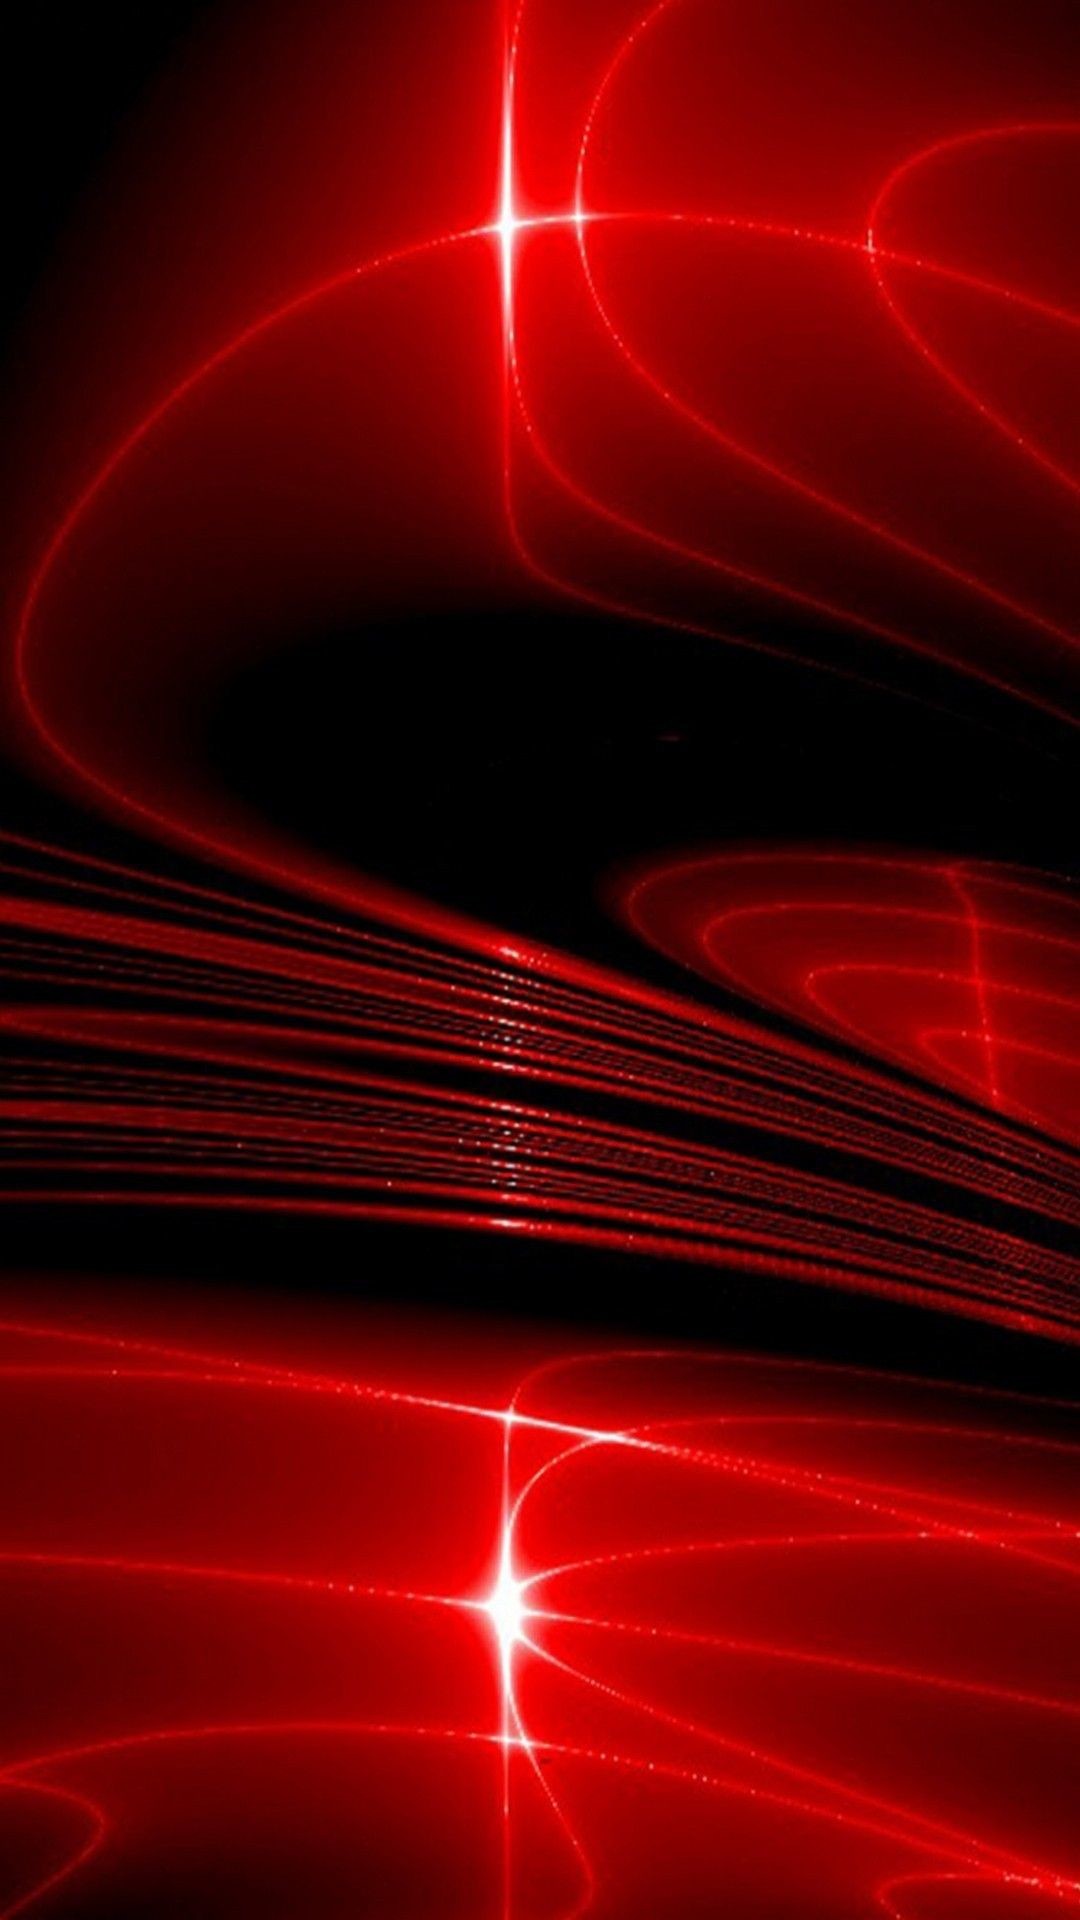 Phone Wallpaper Images Hd - technology